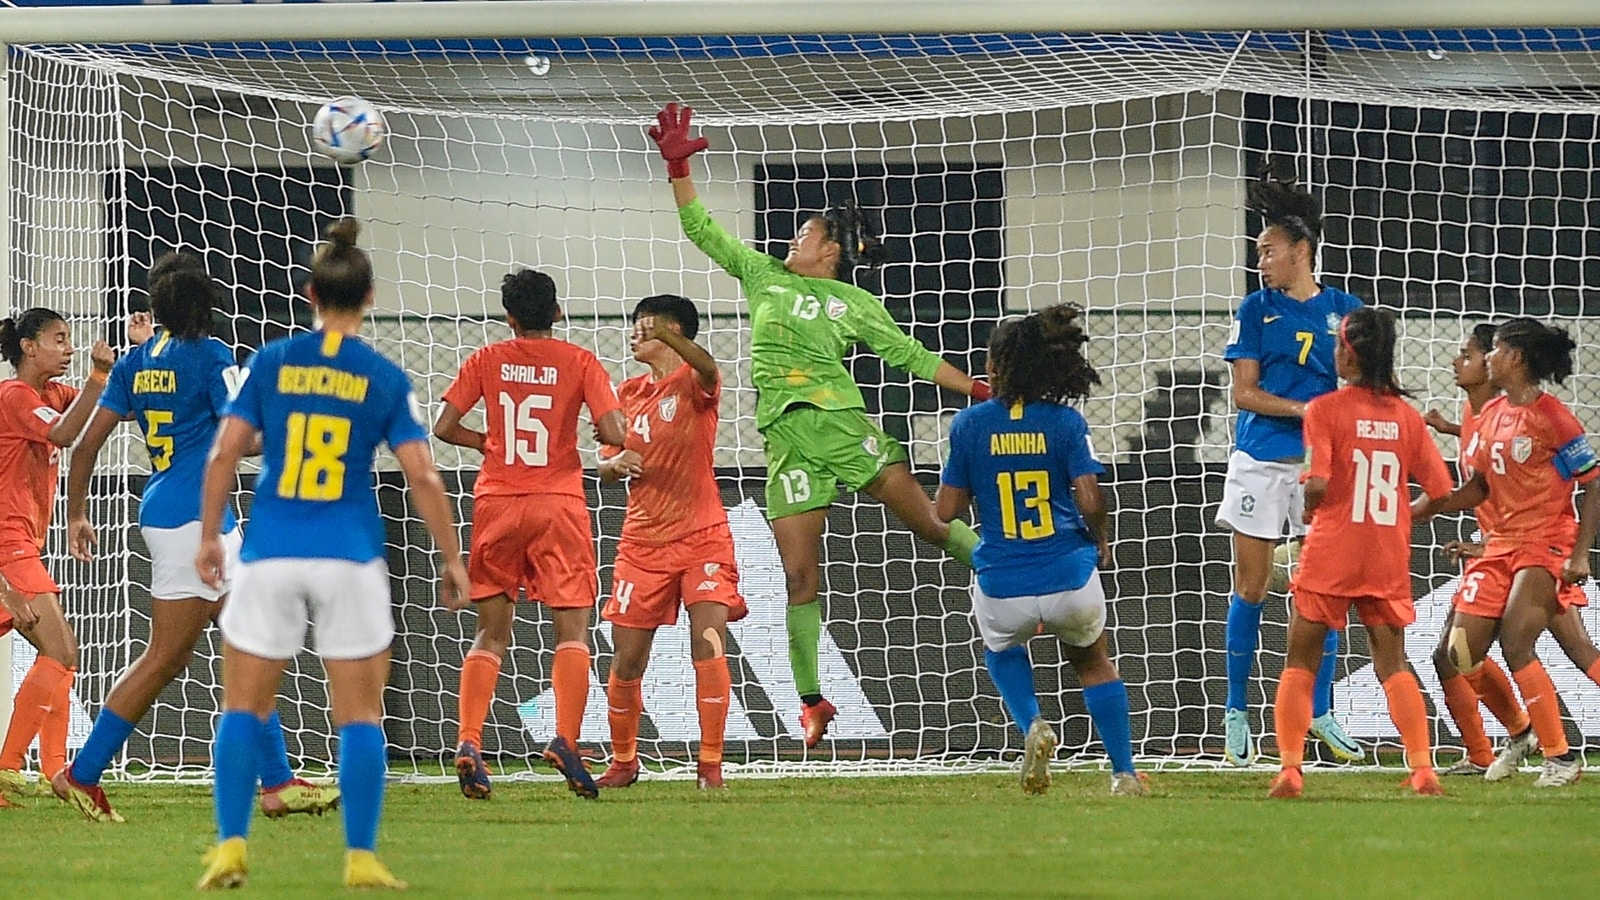 india-go-down-0-5-to-brazil-in-last-group-game